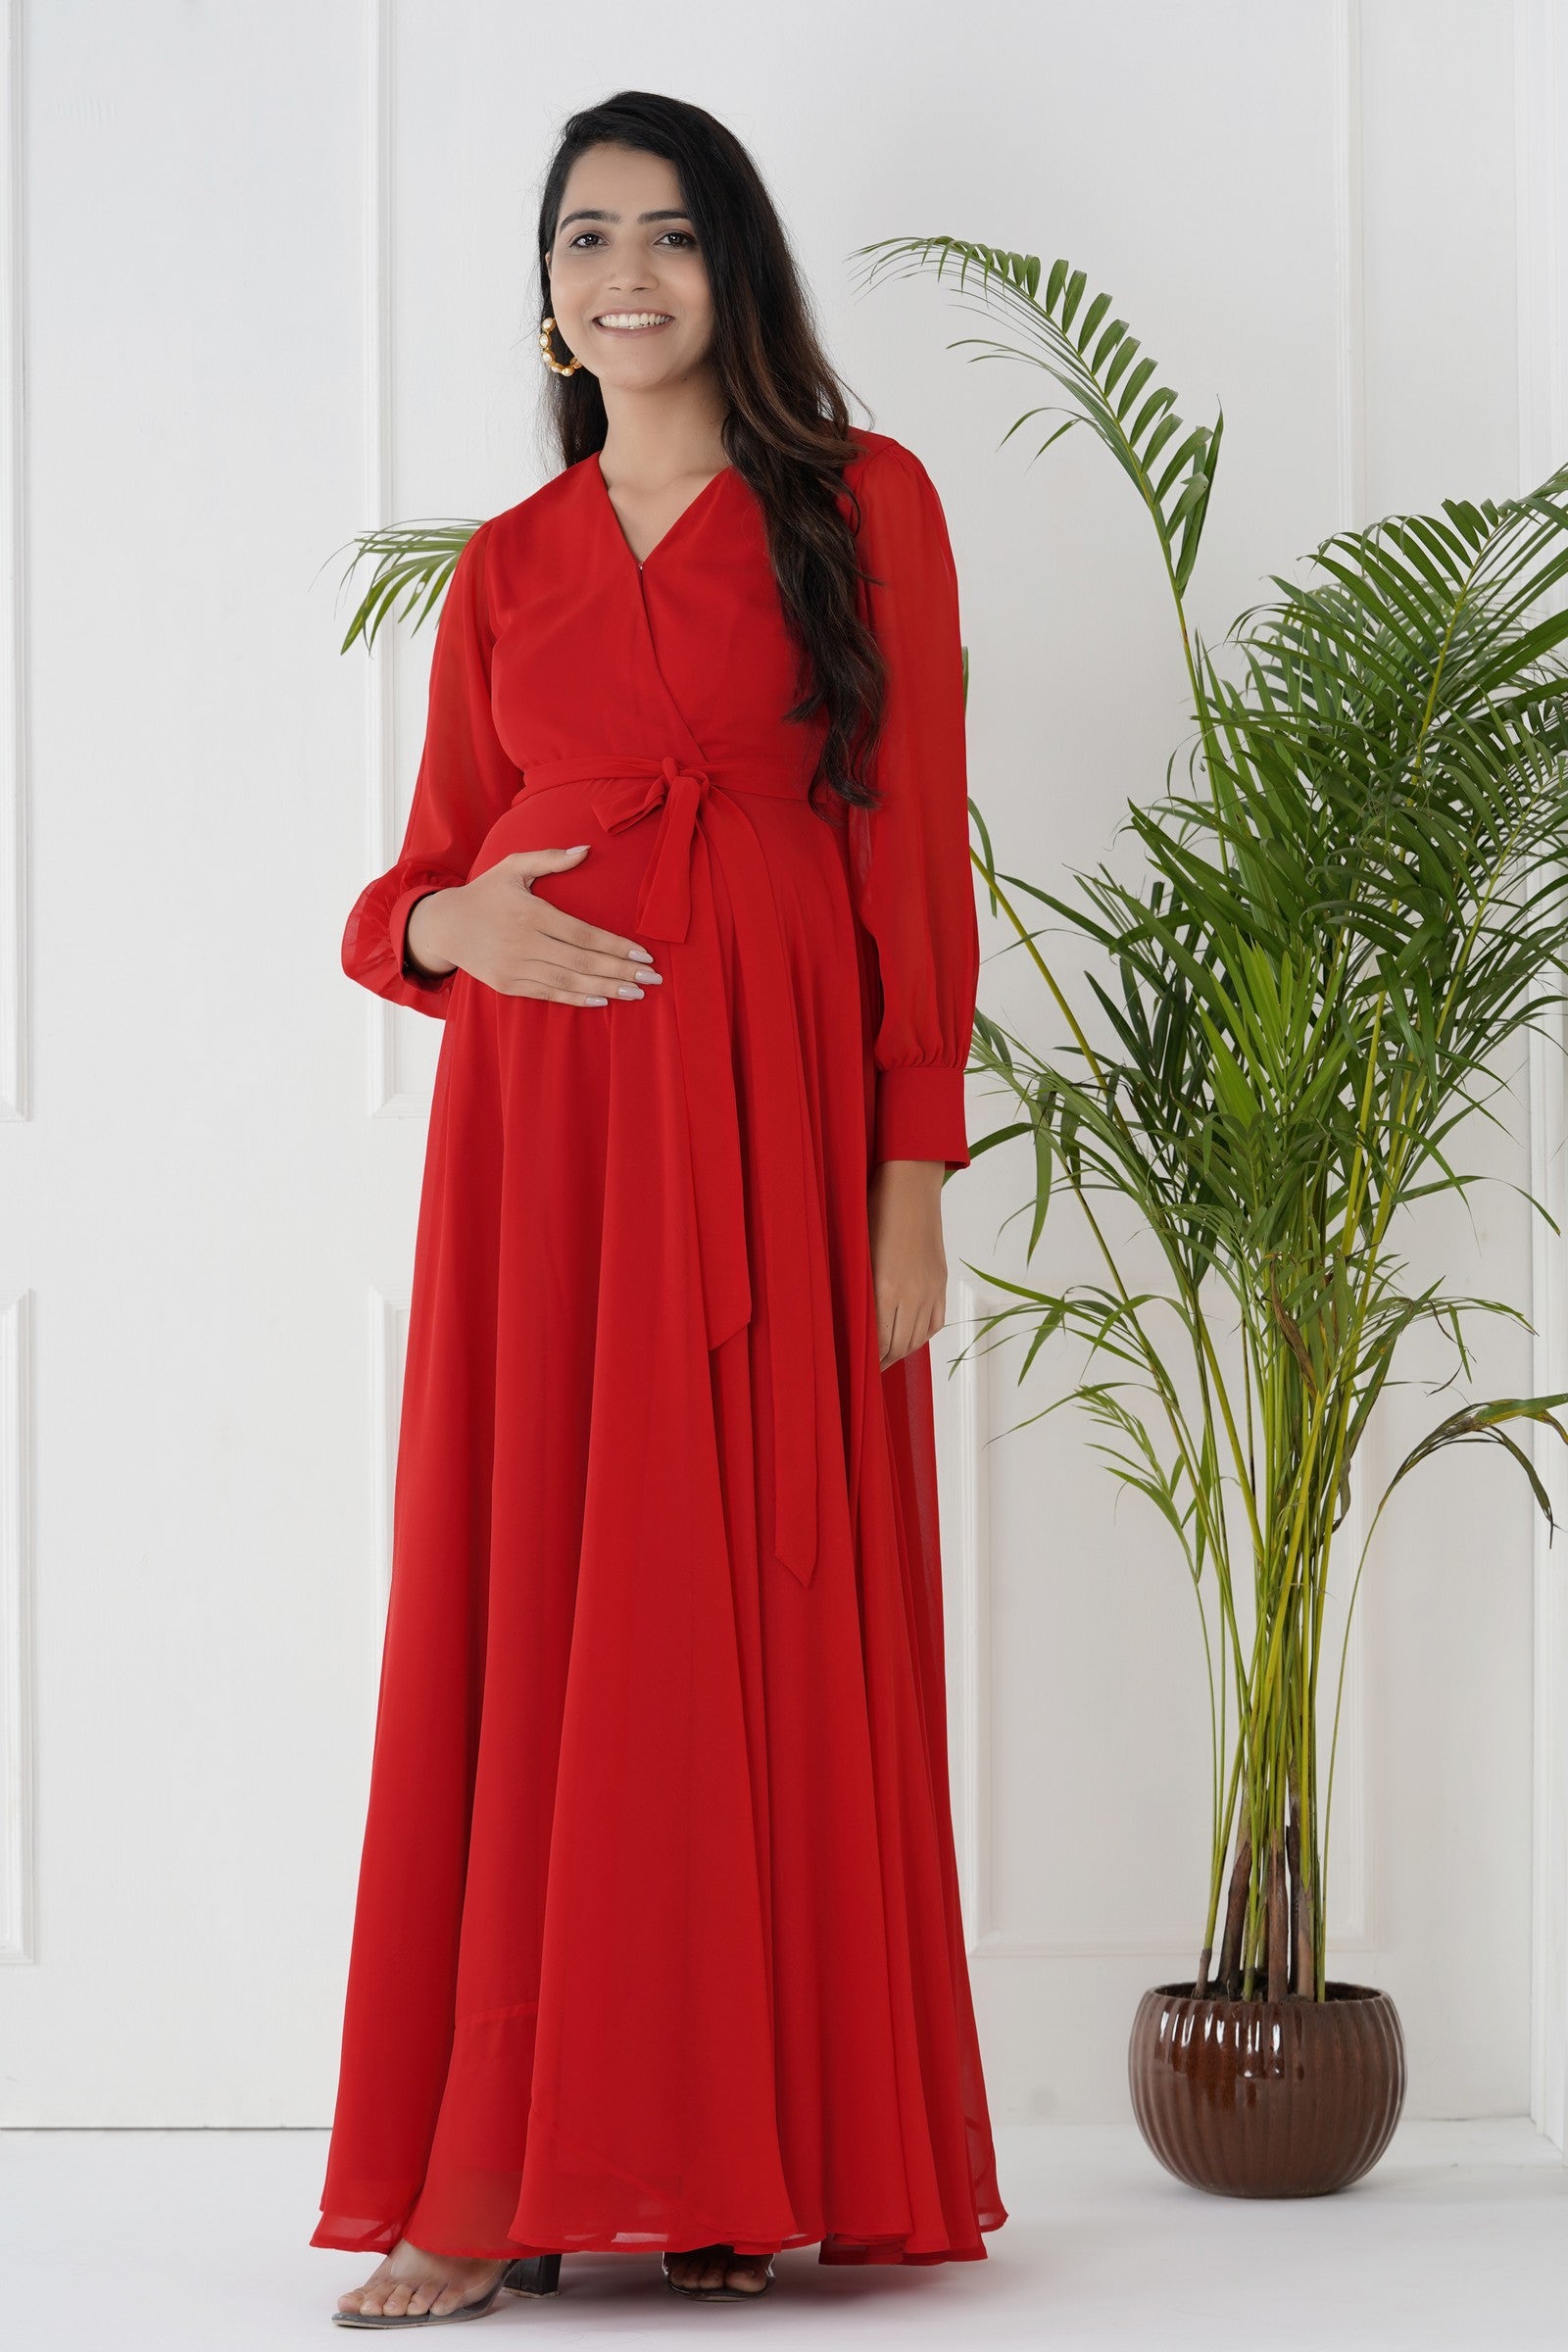 Maternity Gown For Photoshoot